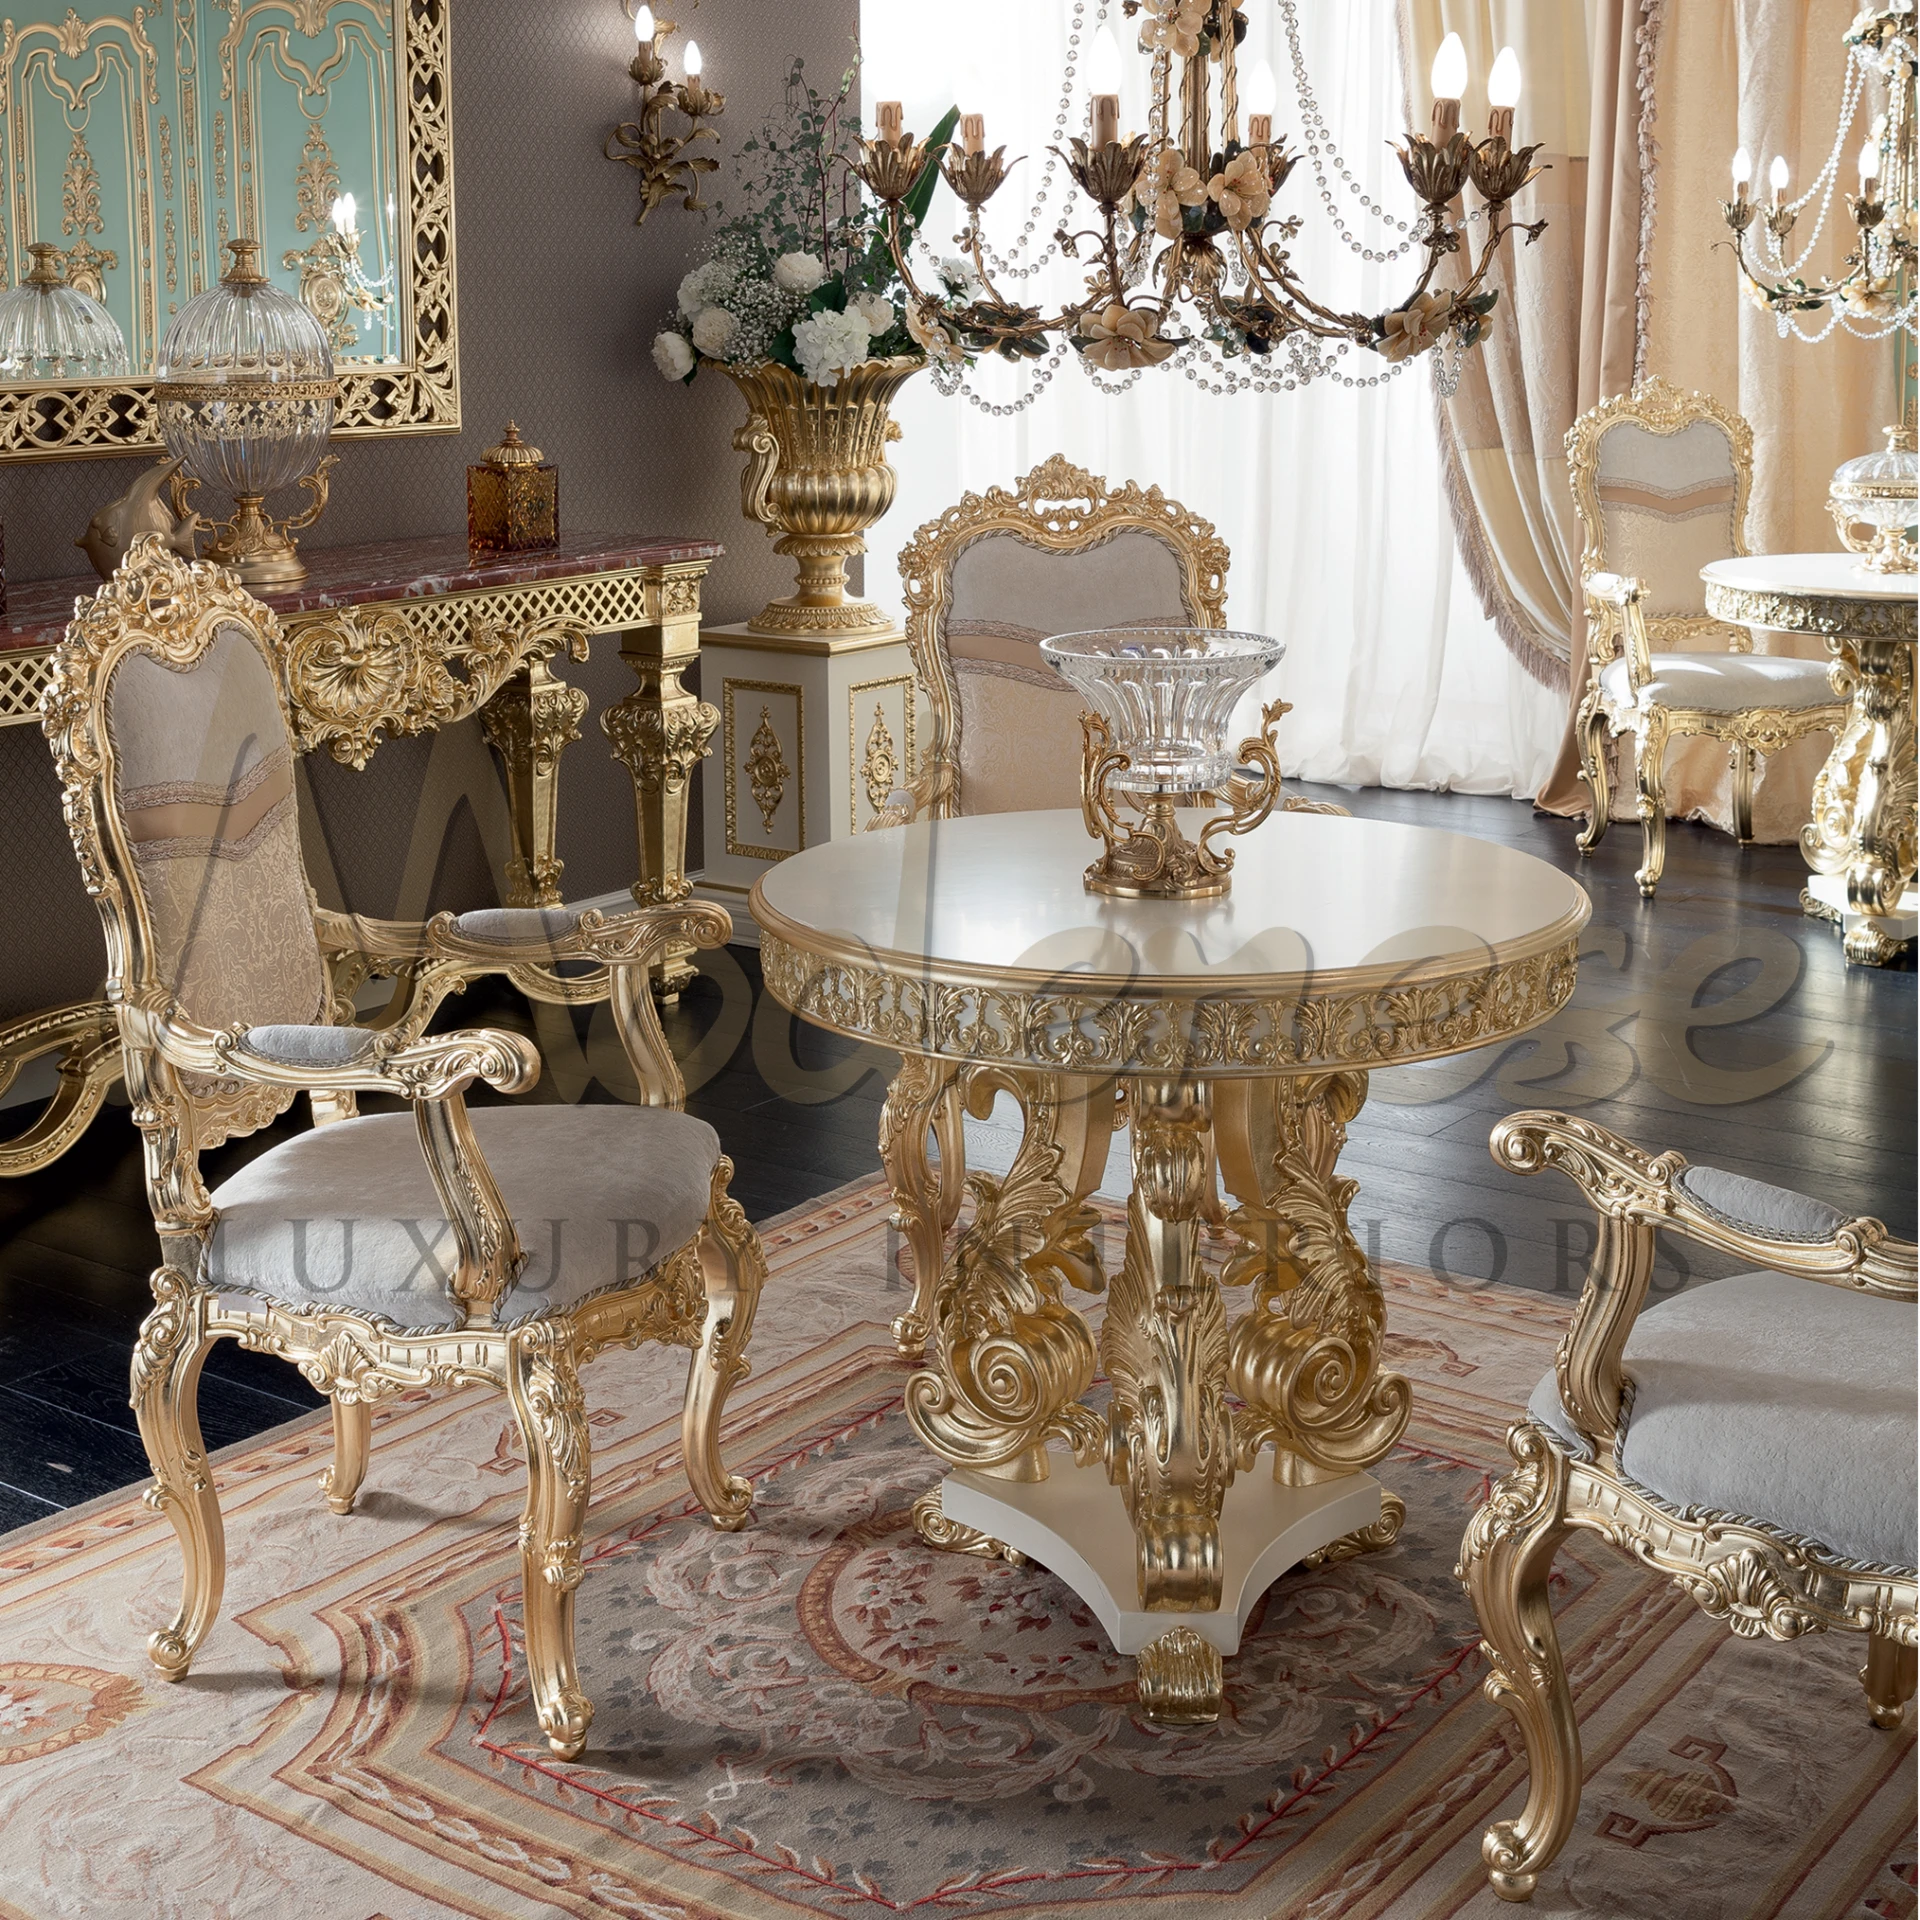 Opulent Classic Gold Leaf Central Table, a centerpiece of luxury with intricate carvings and gold leaf accents, embodying Italian design.